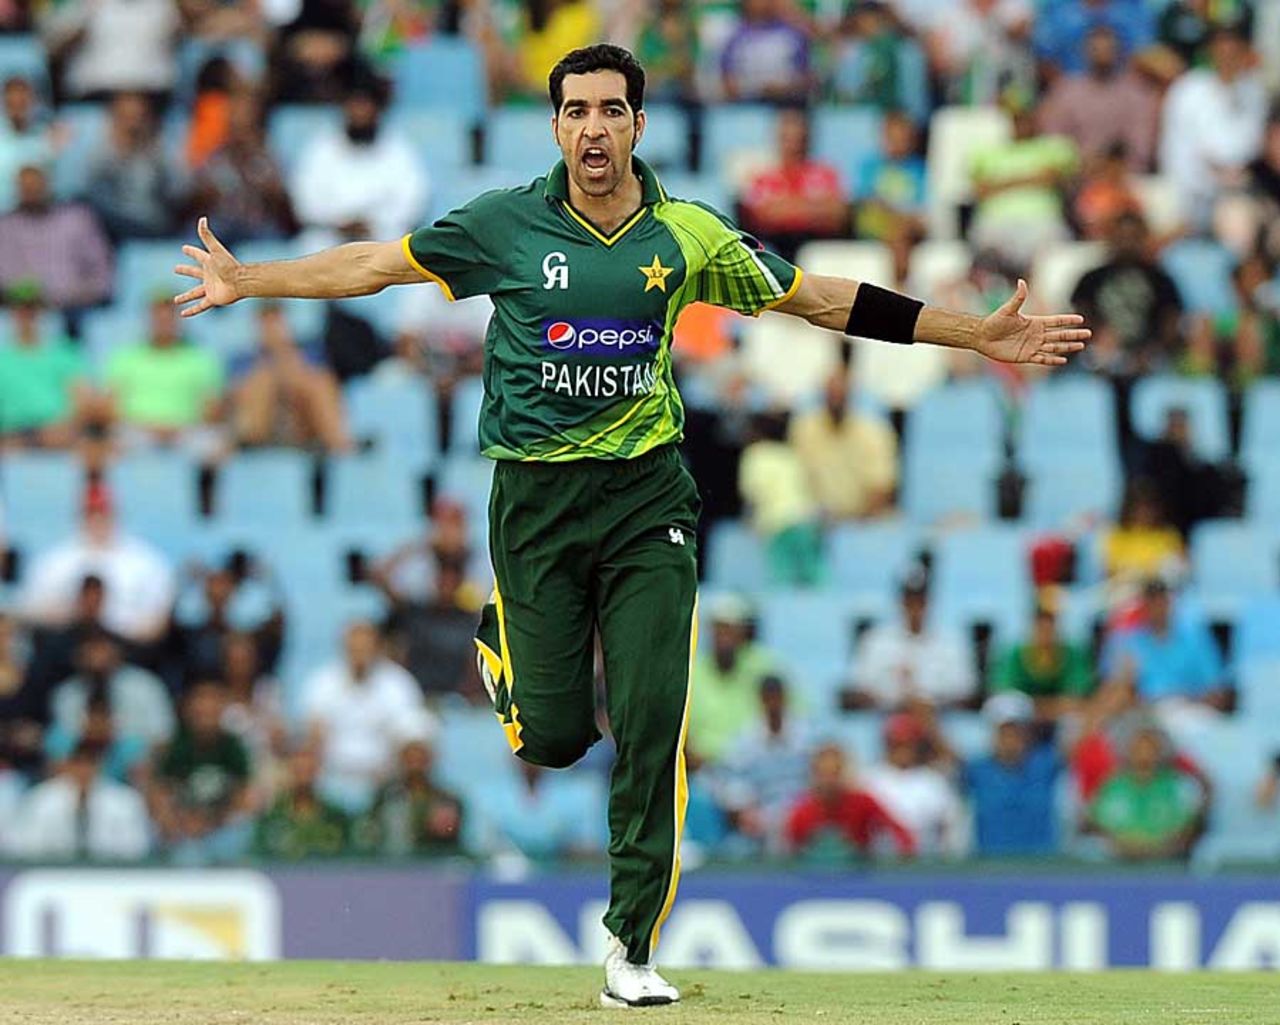 Umar Gul picked up five wickets, South Africa v Pakistan, 2nd T20I, Centurion, March 3, 2013